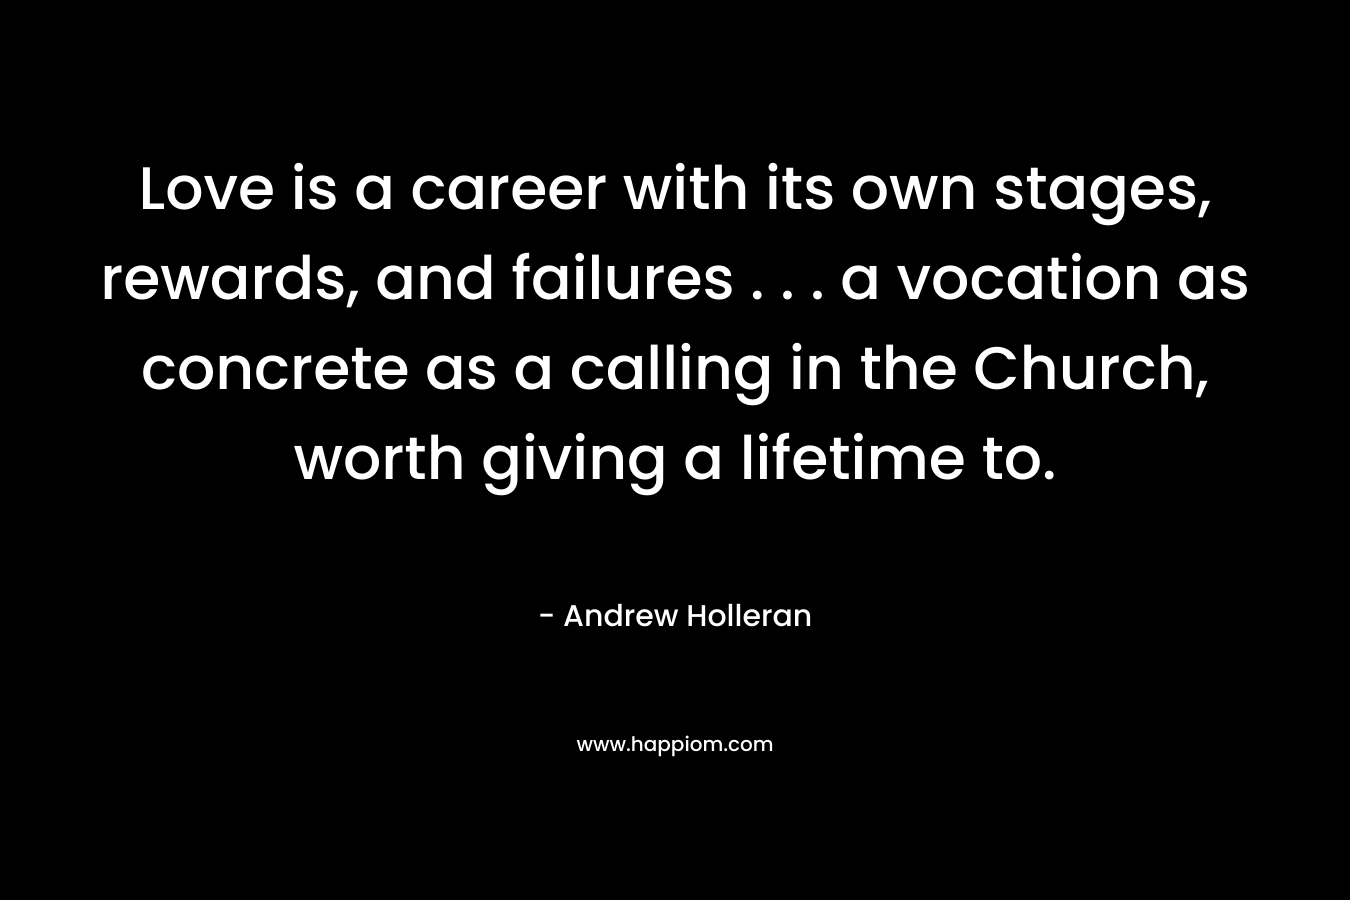 Love is a career with its own stages, rewards, and failures . . . a vocation as concrete as a calling in the Church, worth giving a lifetime to. – Andrew Holleran